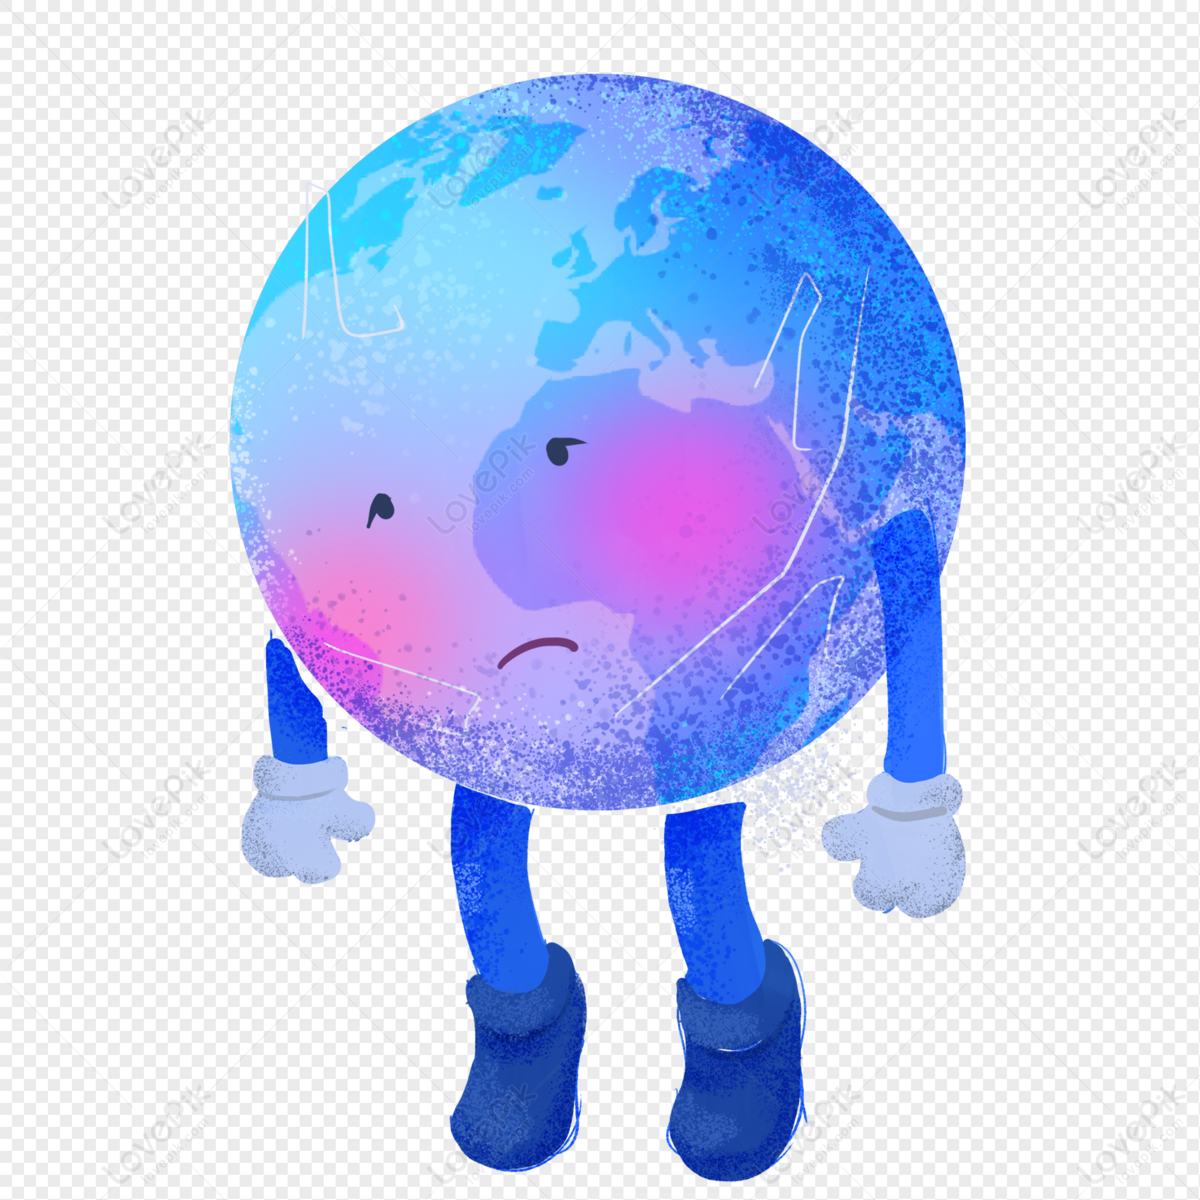 Sad Earth PNG Free Download And Clipart Image For Free Download - Lovepik |  401426893